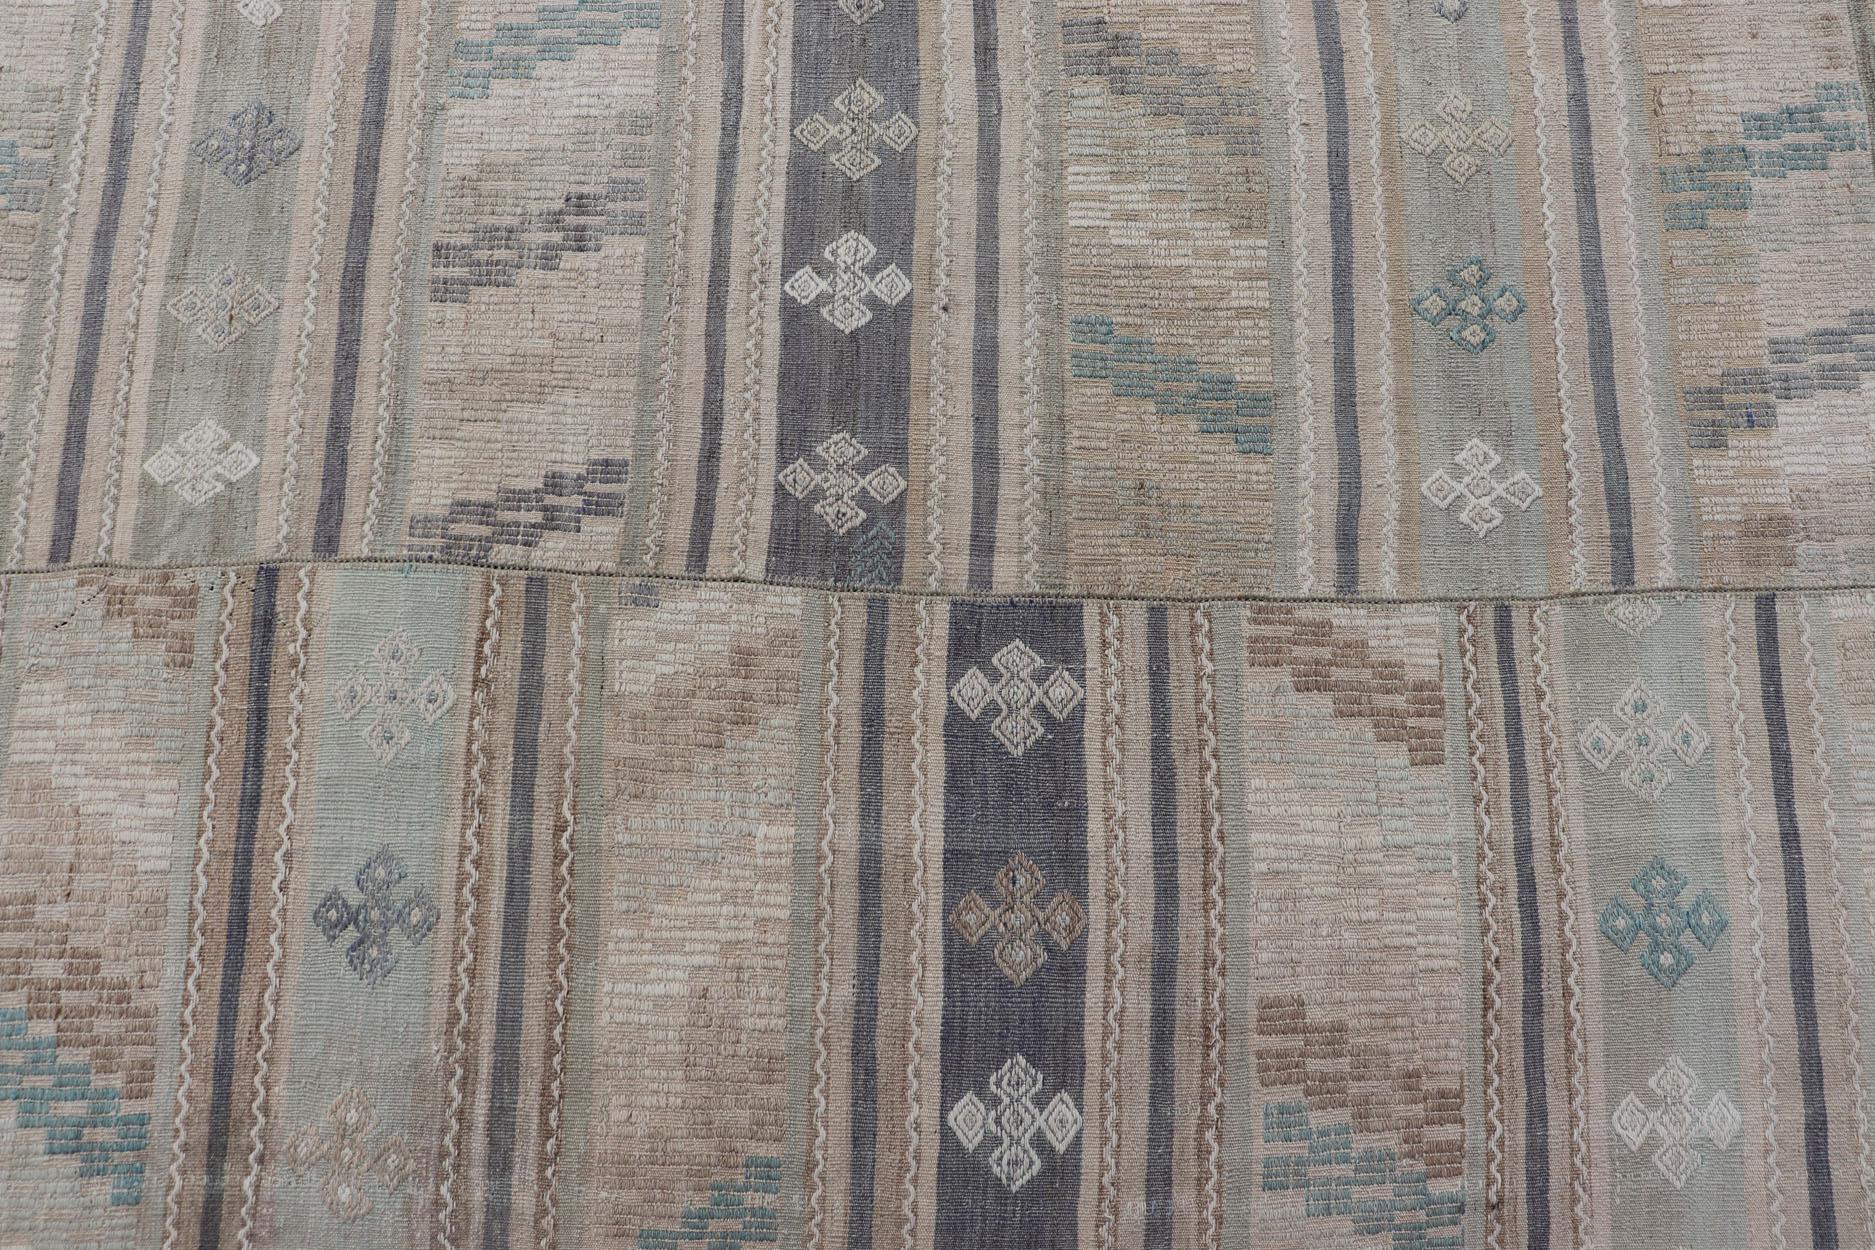 Vintage Hand Woven Turkish Paneled Kilim Vintage Rug in Muted Colors For Sale 7